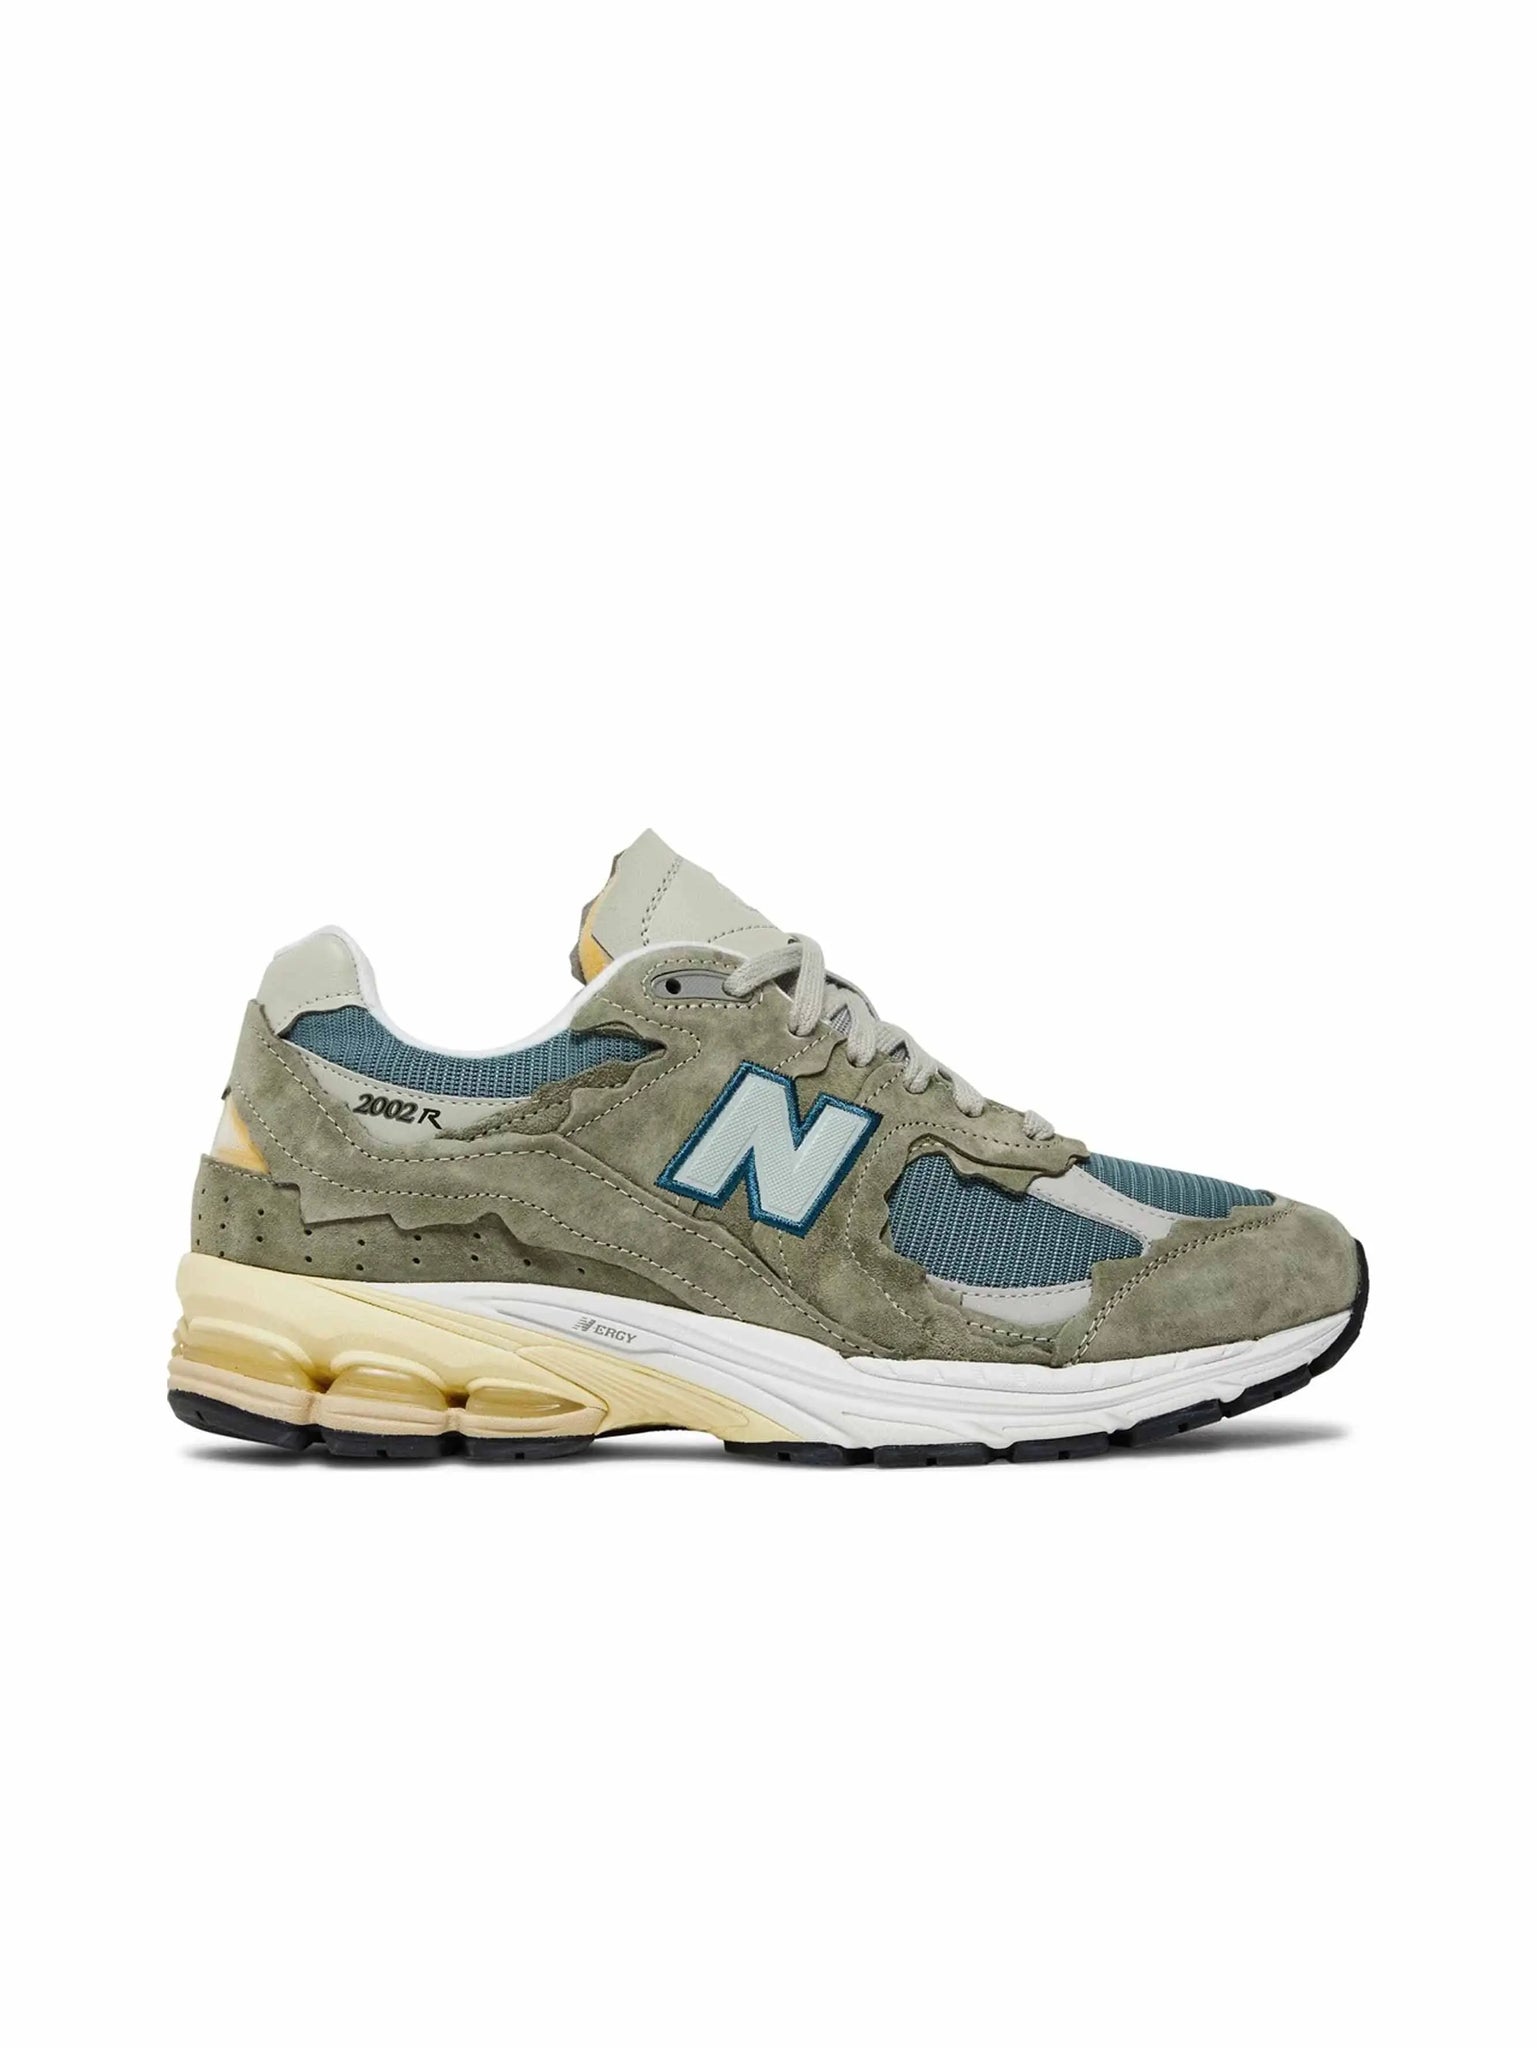 New Balance 2002R Protection Pack Mirage Grey in Auckland, New Zealand - Shop name